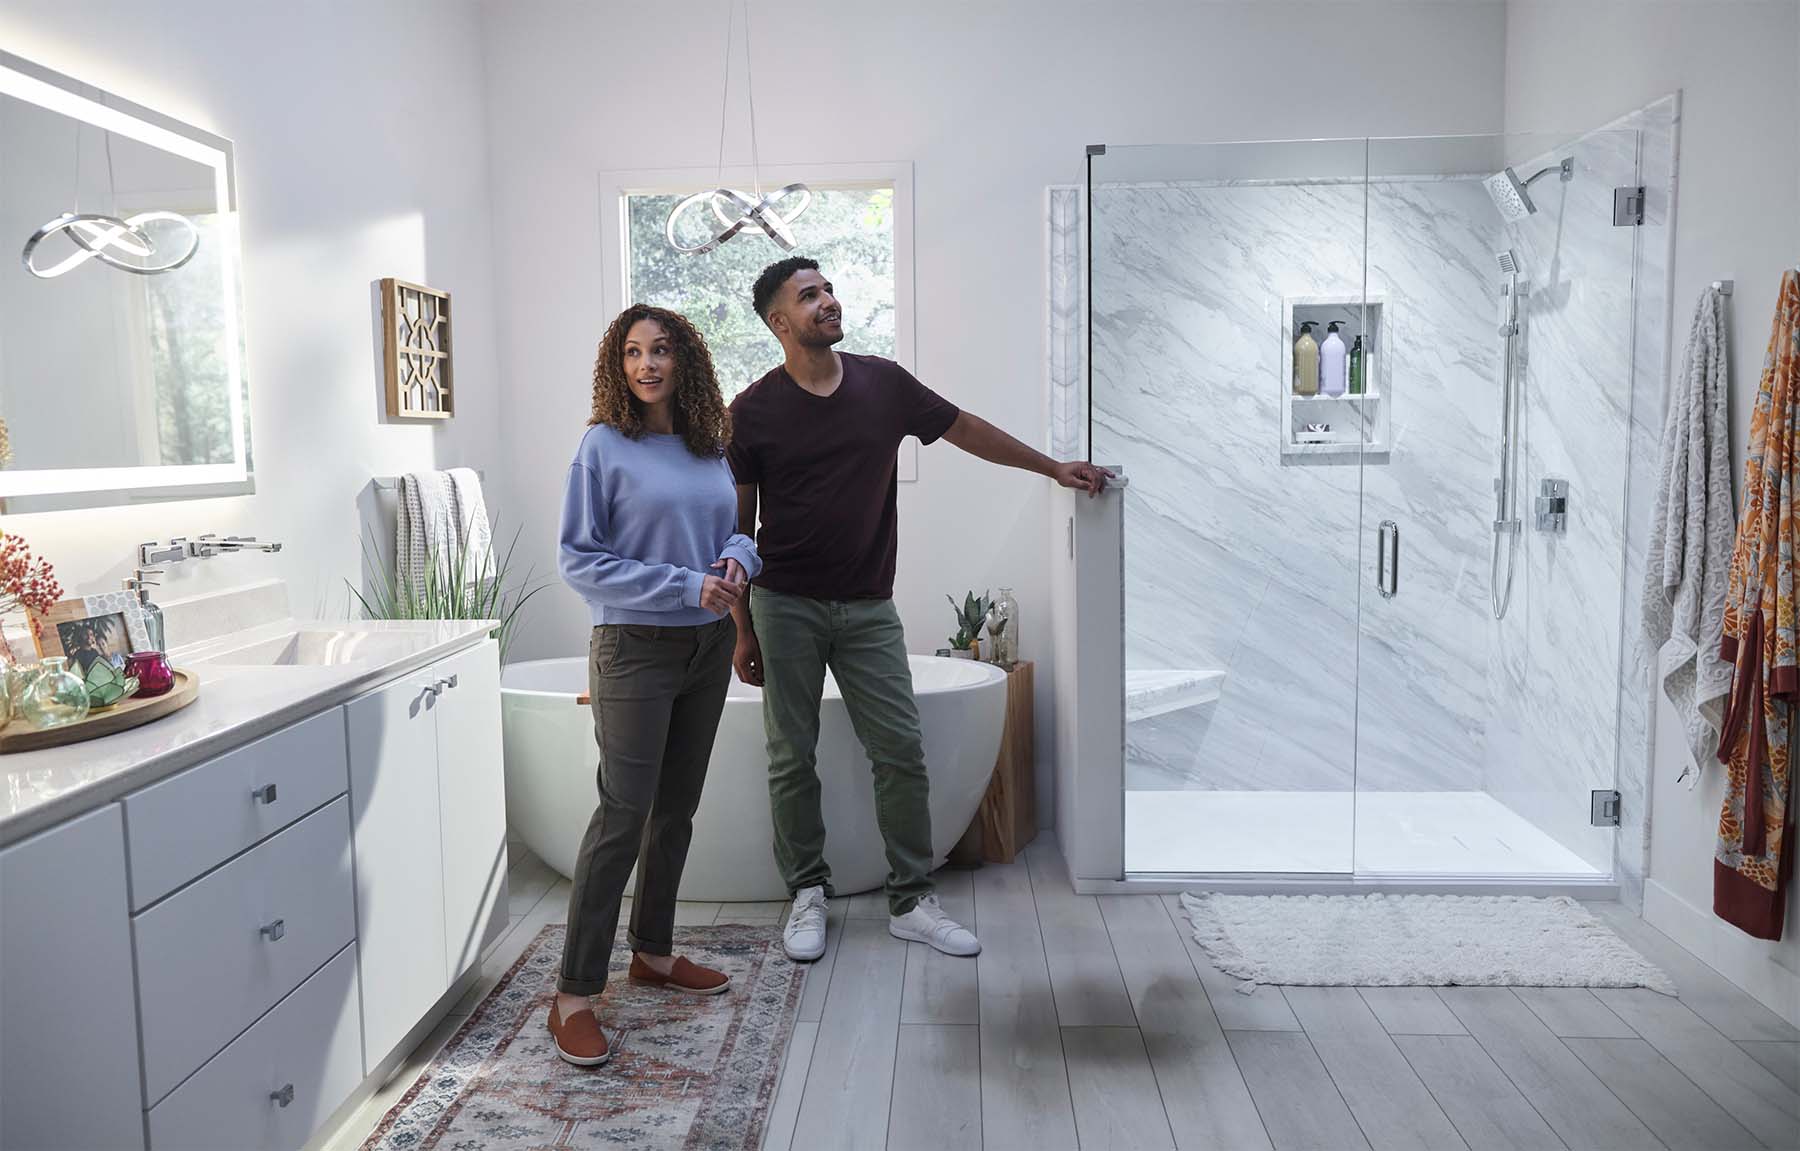 A couple stands in a modern bathroom, showcasing a sleek new bathroom remodel from Re-Bath.